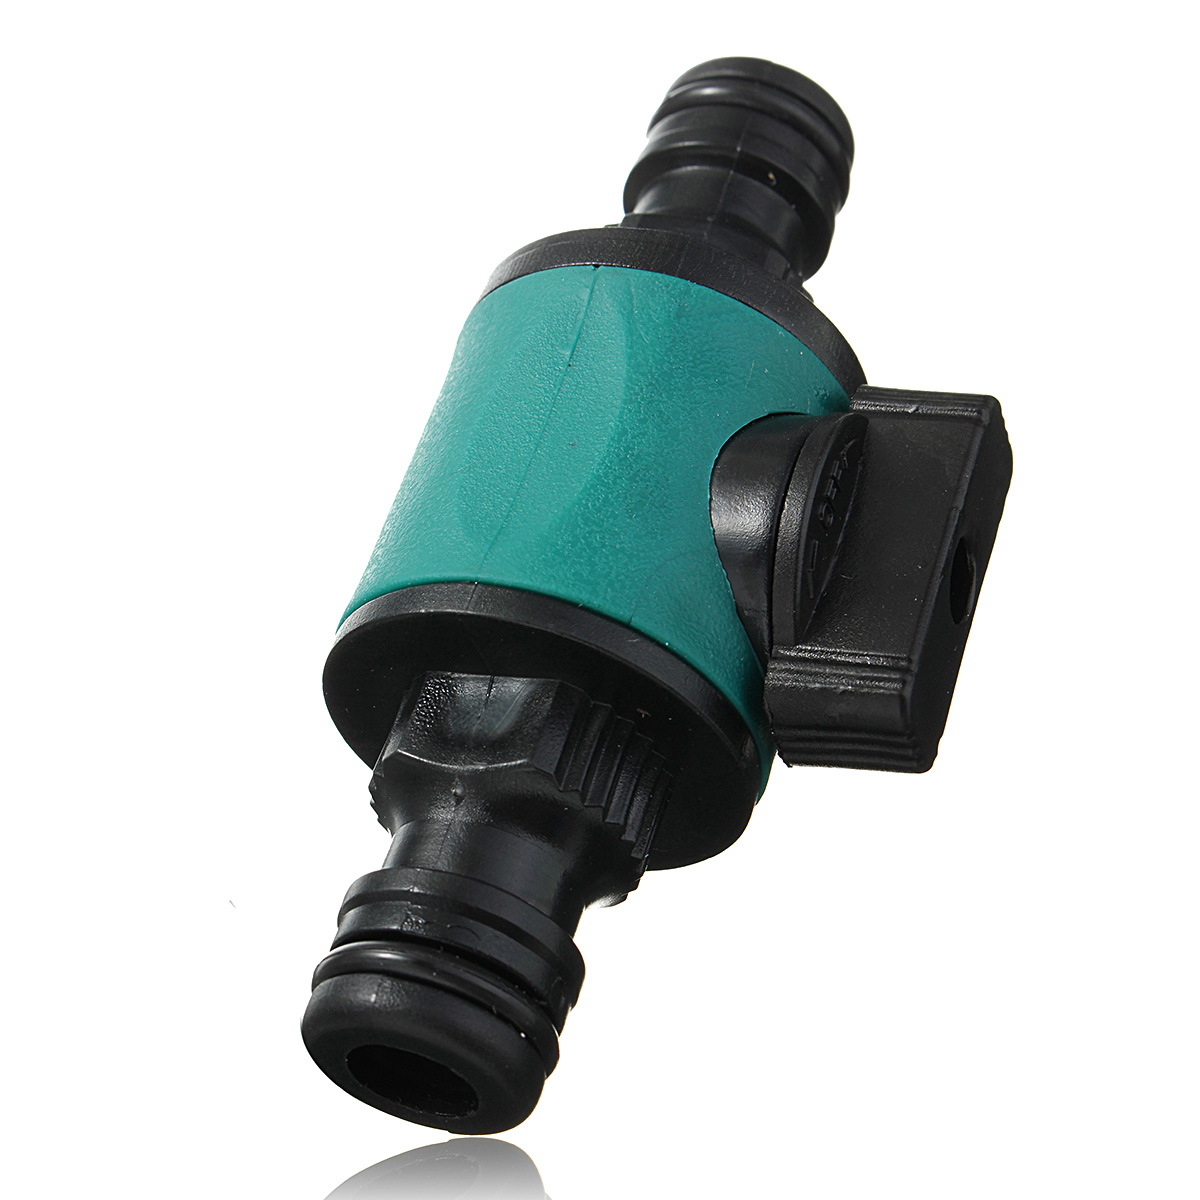 Garden-Hose-Tap-Pipe-Compatible-12-2-Way-Connector-Valve-Convertor-Fitting-Adapter-Tool-1290232-4